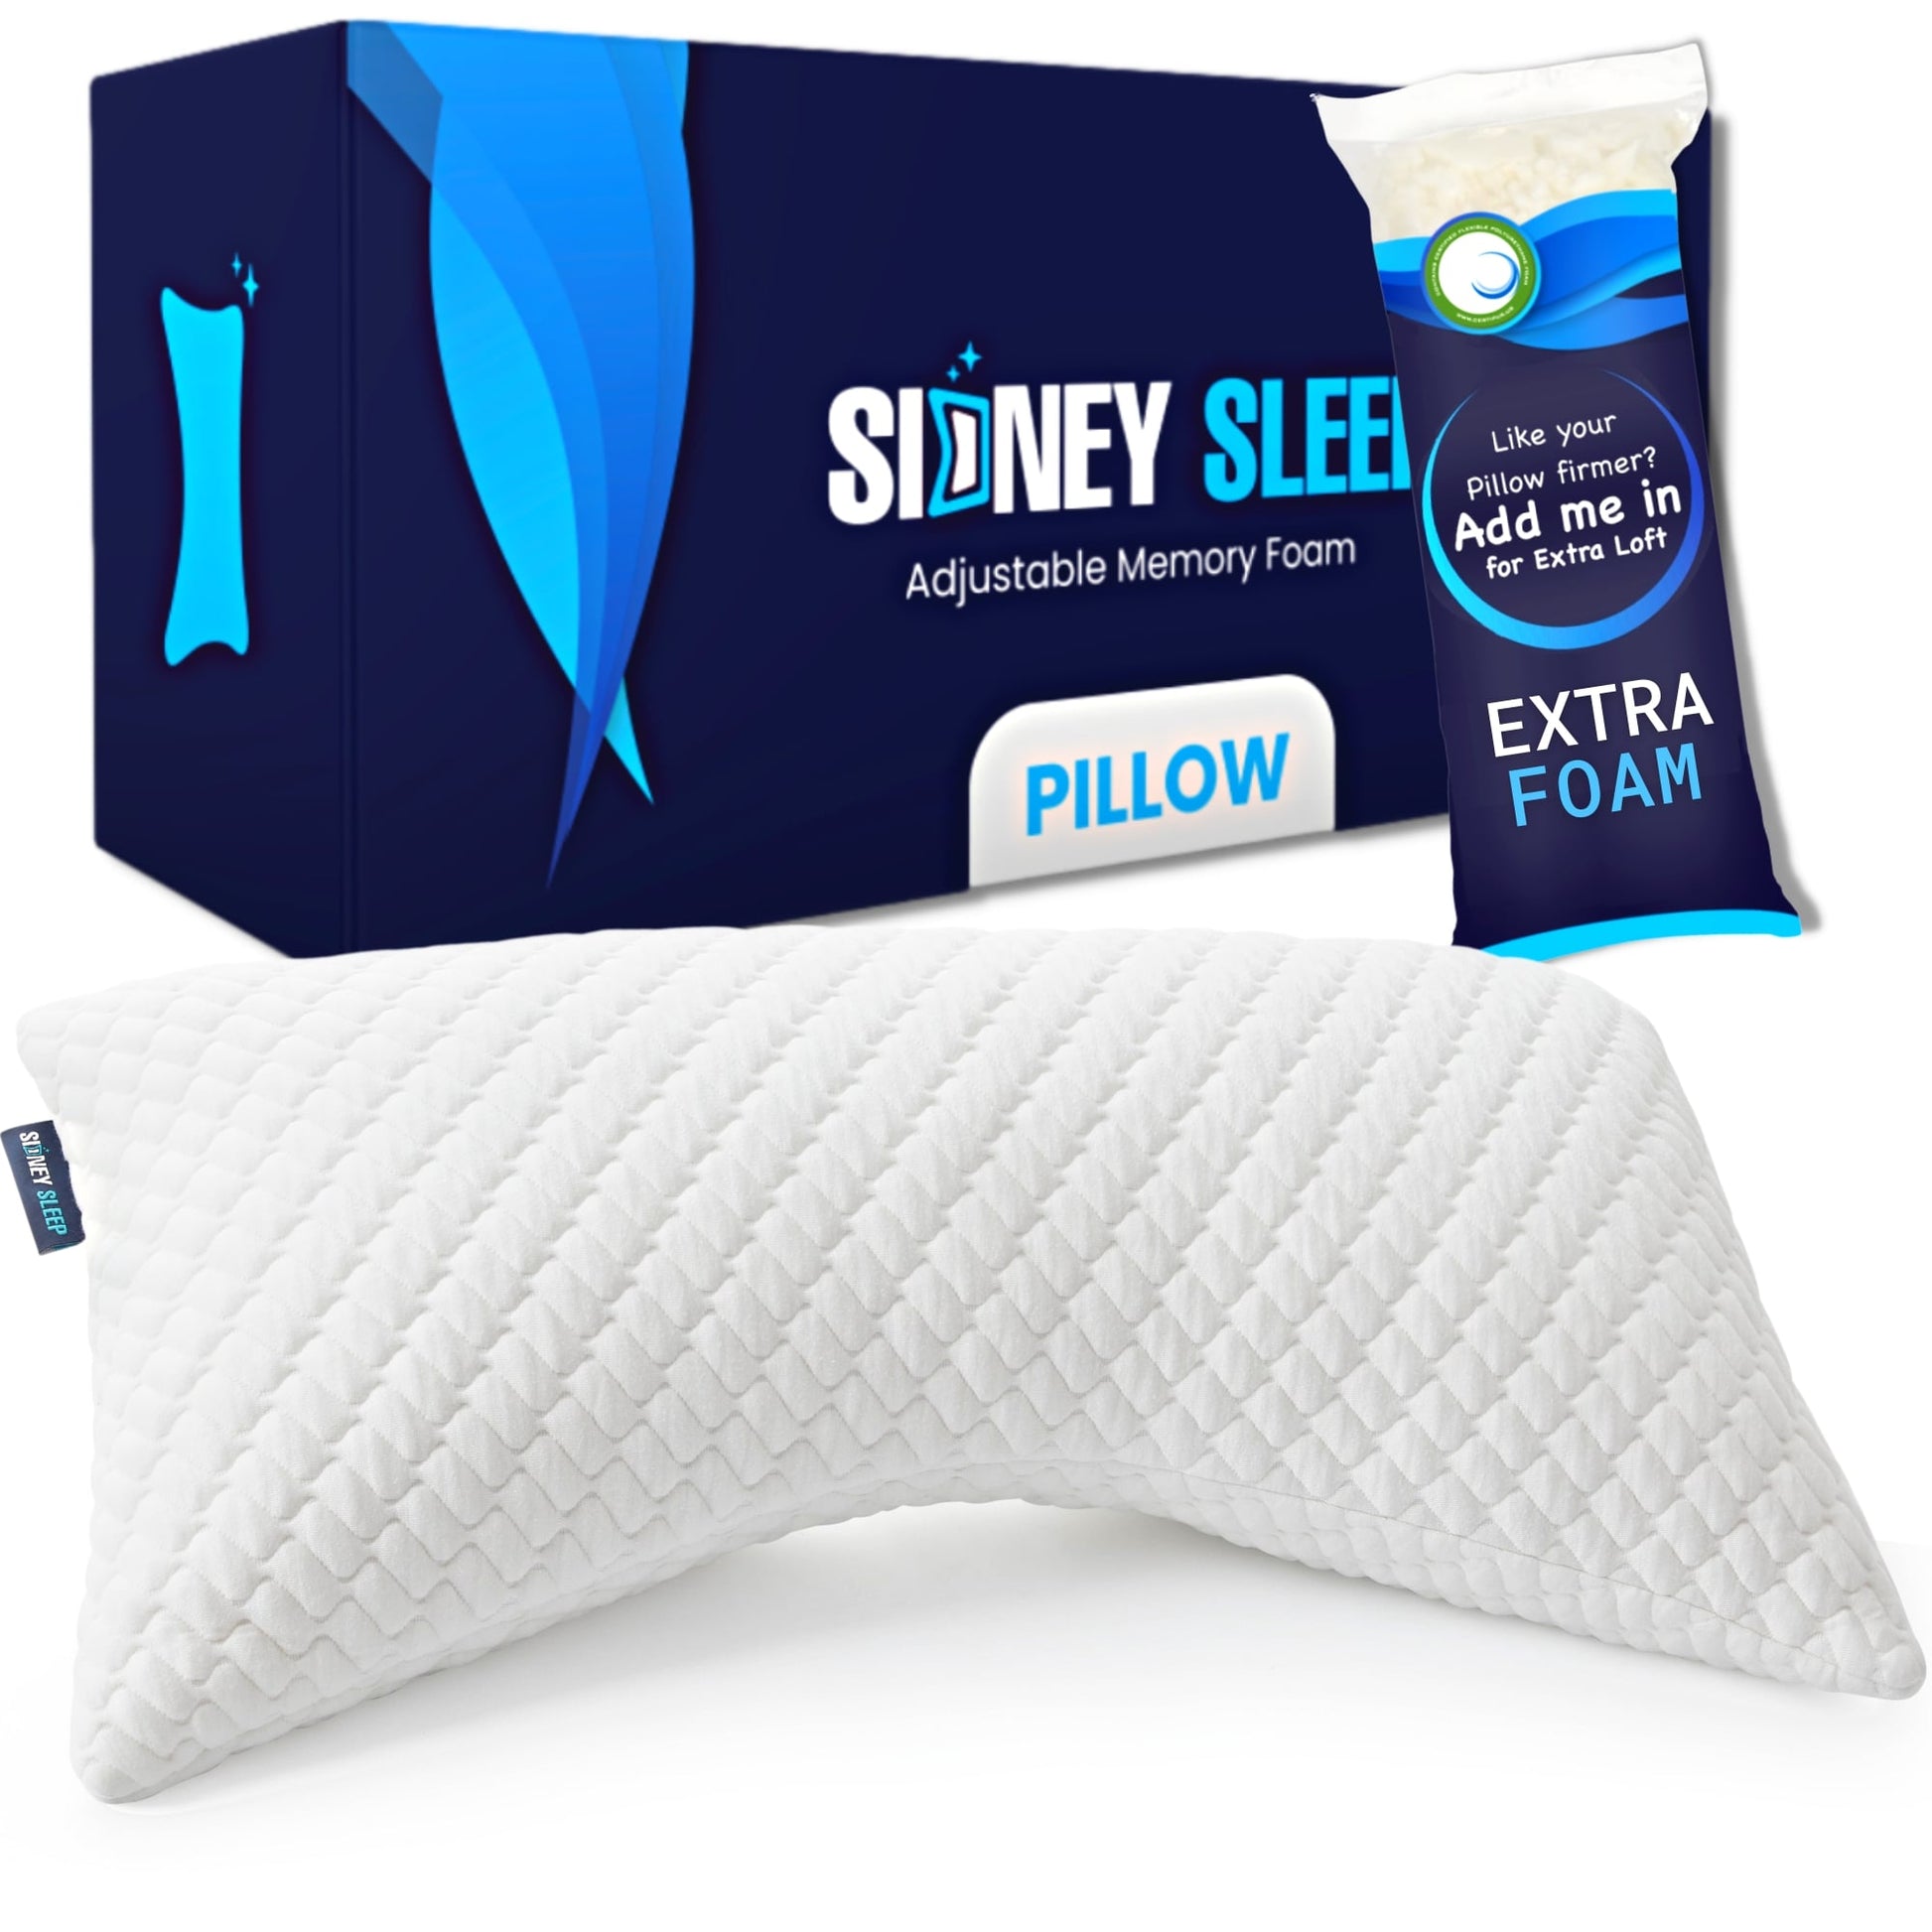 13 Best Pillows for Back, Neck and Shoulder Pain